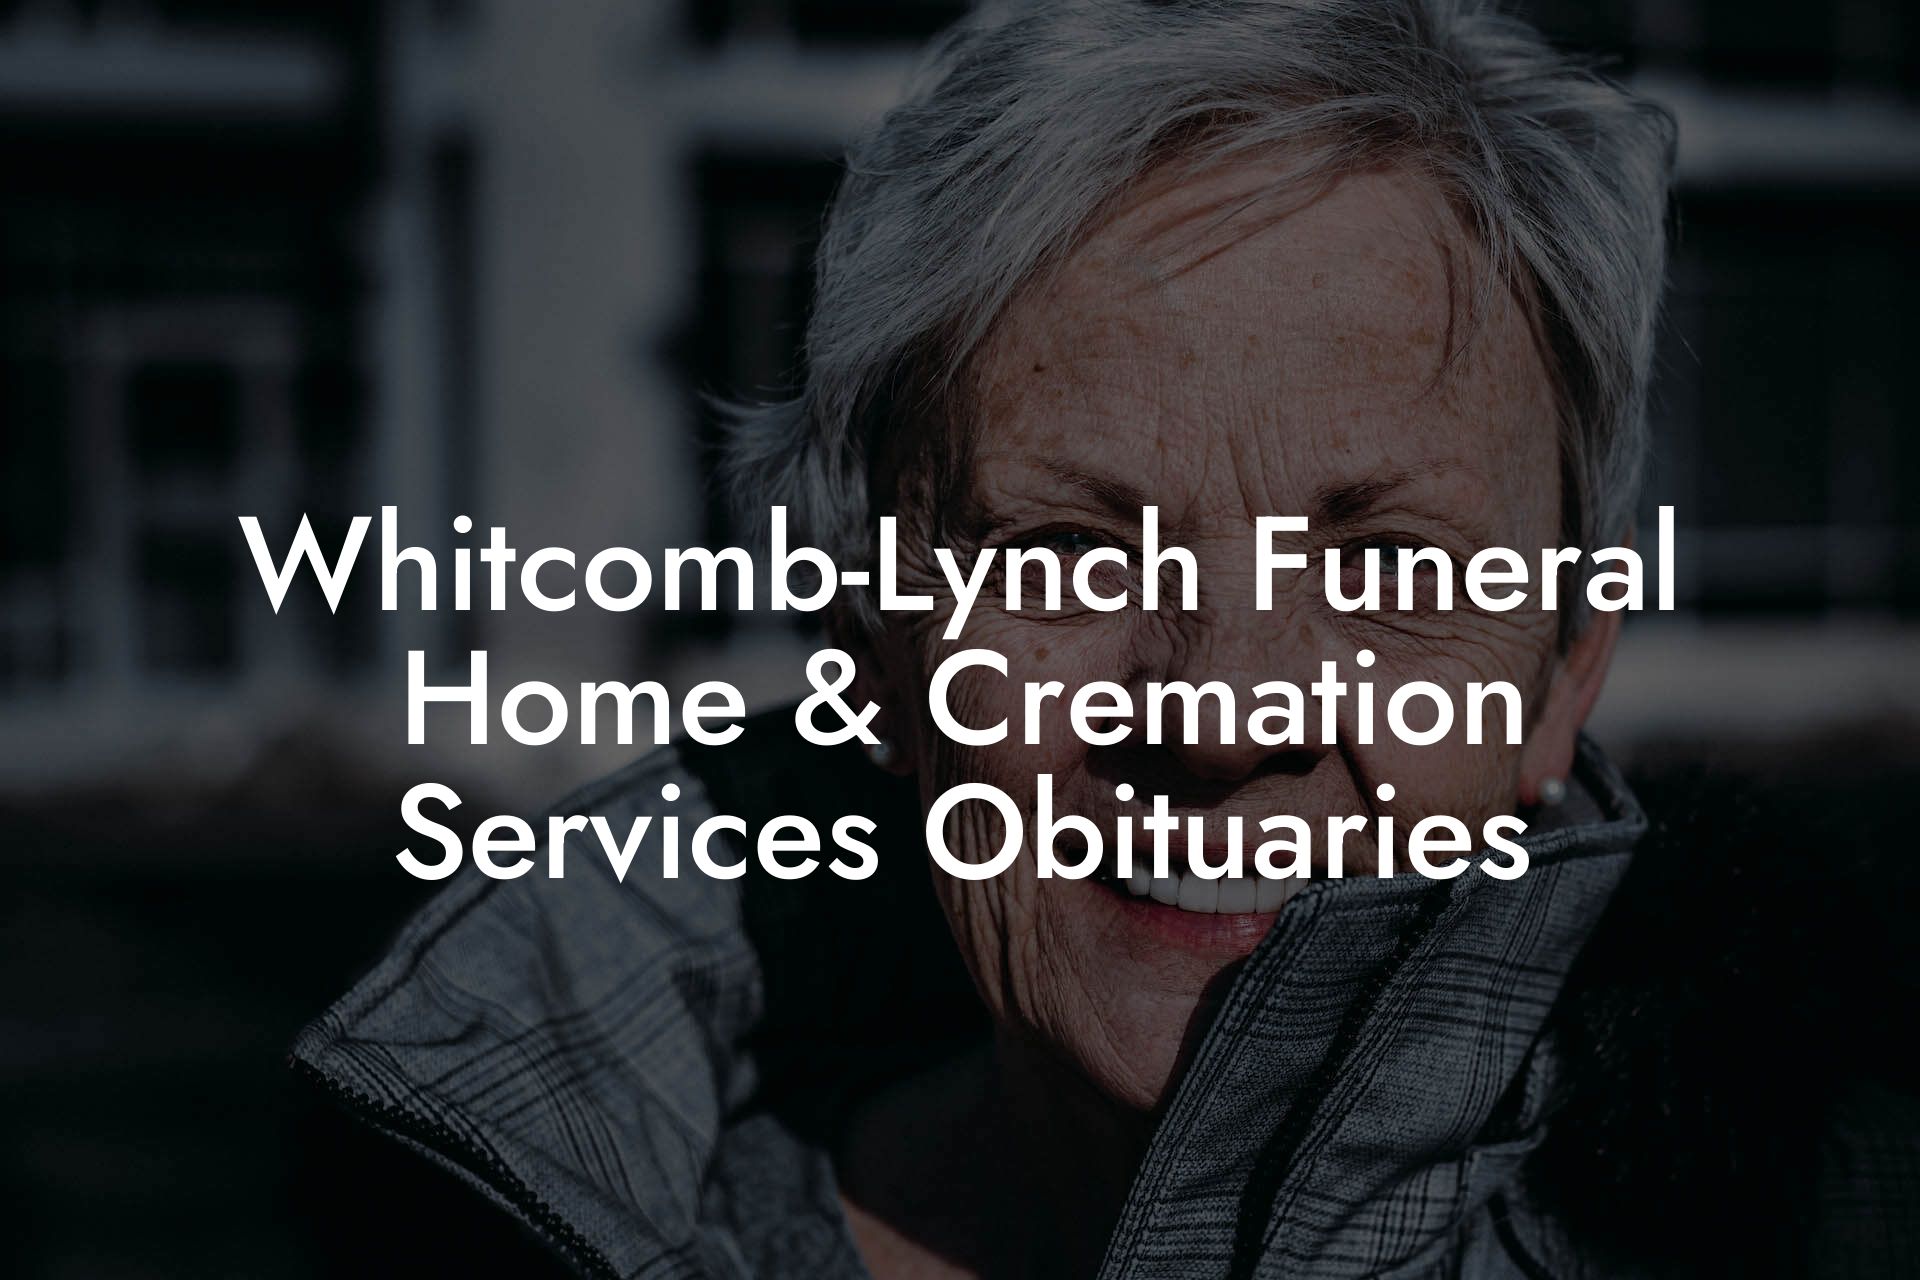 Whitcomb-Lynch Funeral Home & Cremation Services Obituaries